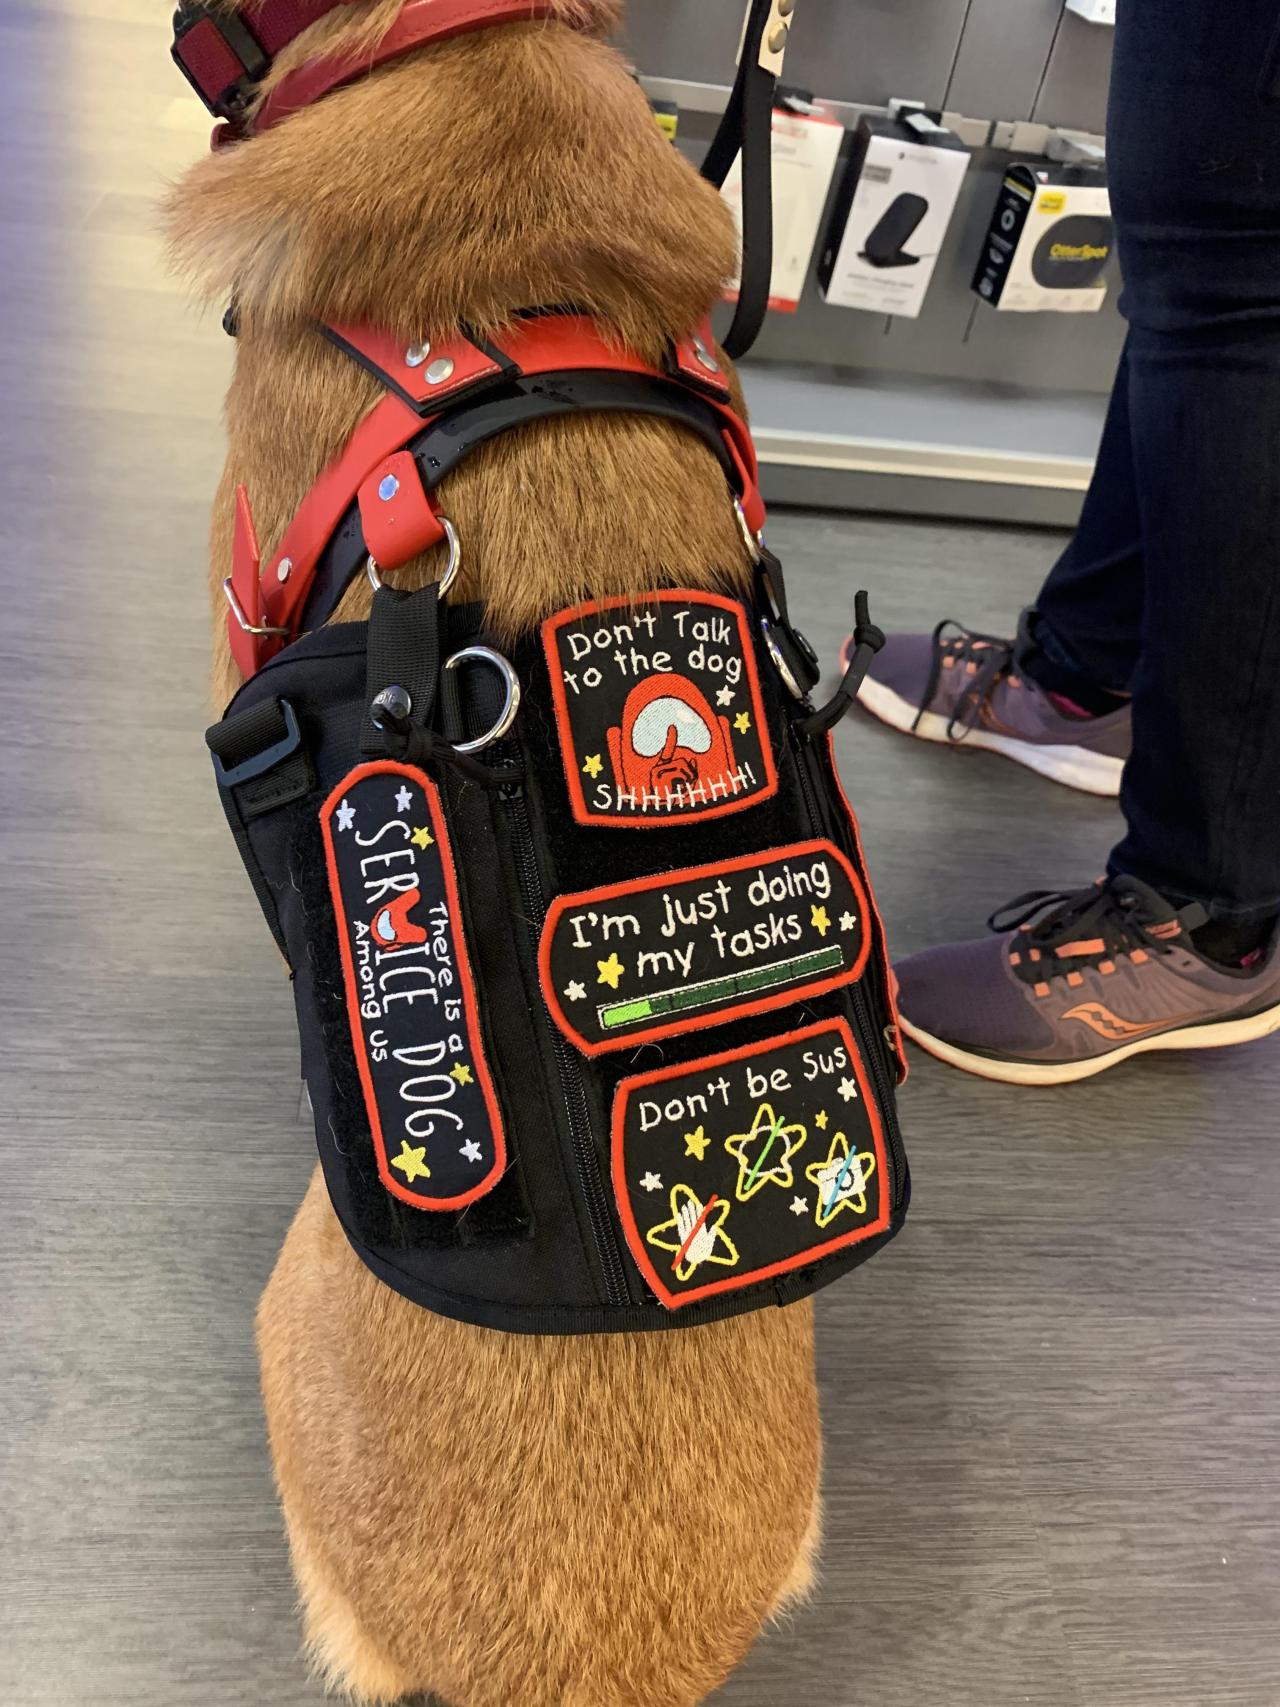 cold-butter-warm-toast:
“startplaysmile:
““There’s a service dog among us” ”
THIS IS SO CUTE
”